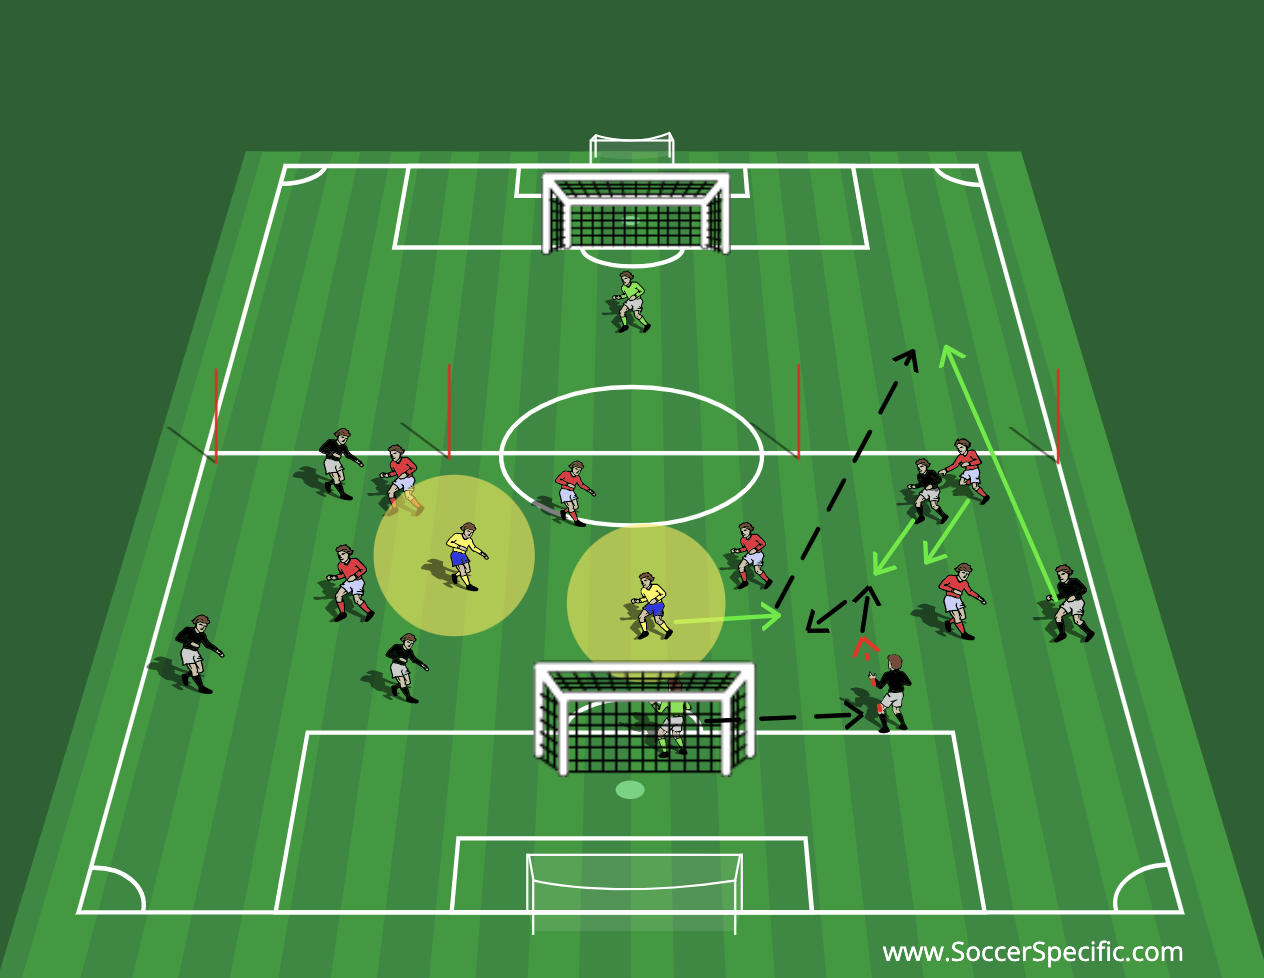 6 v 6 + 2 Wide Combinations Small Sided Game | SoccerSpecific.com